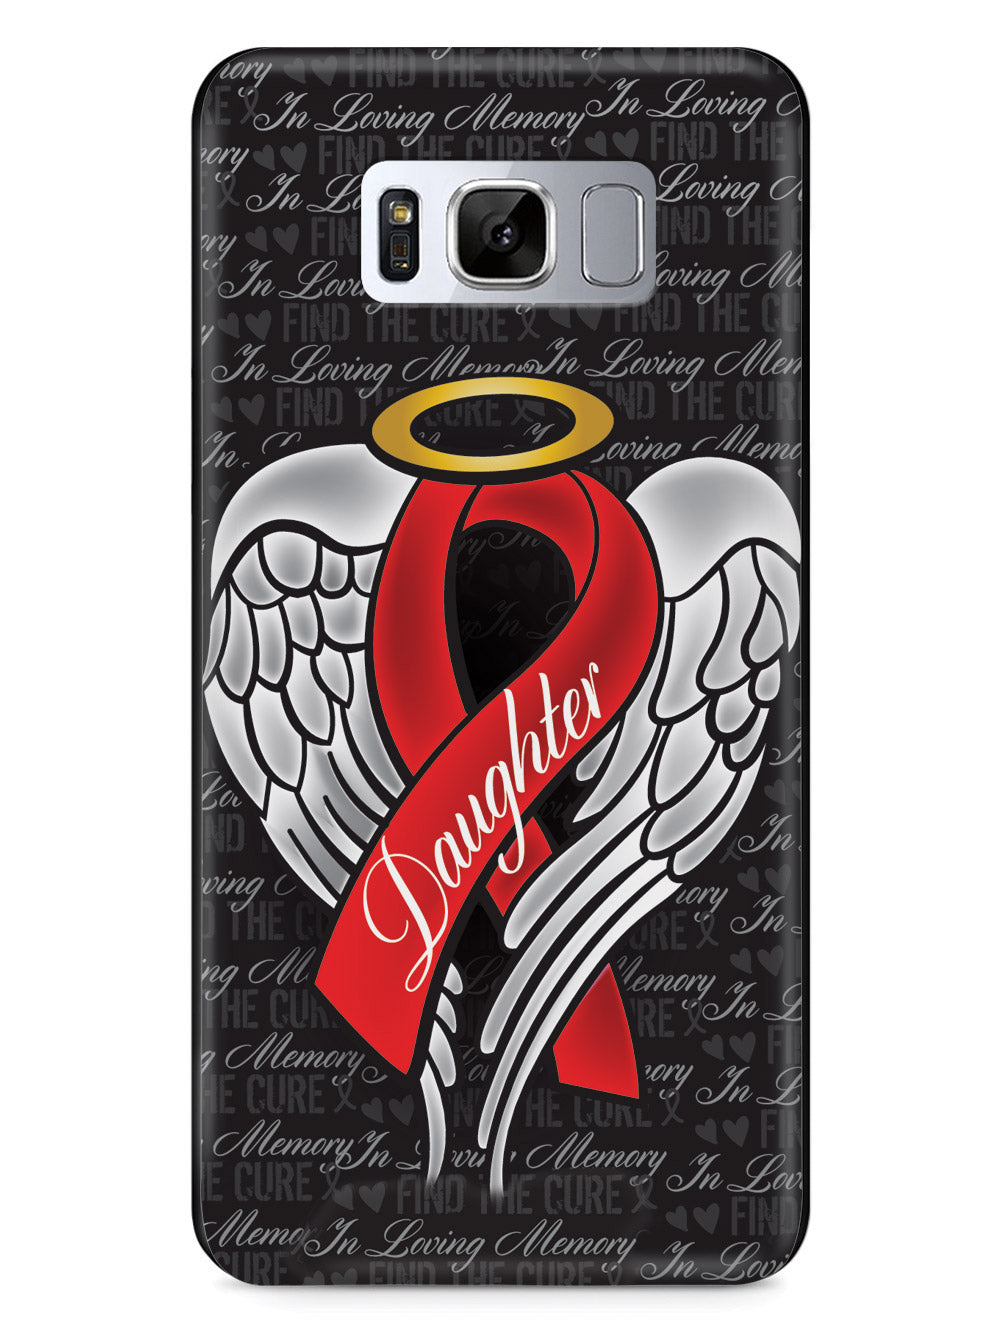 In Loving Memory of My Daughter - Red Ribbon Case